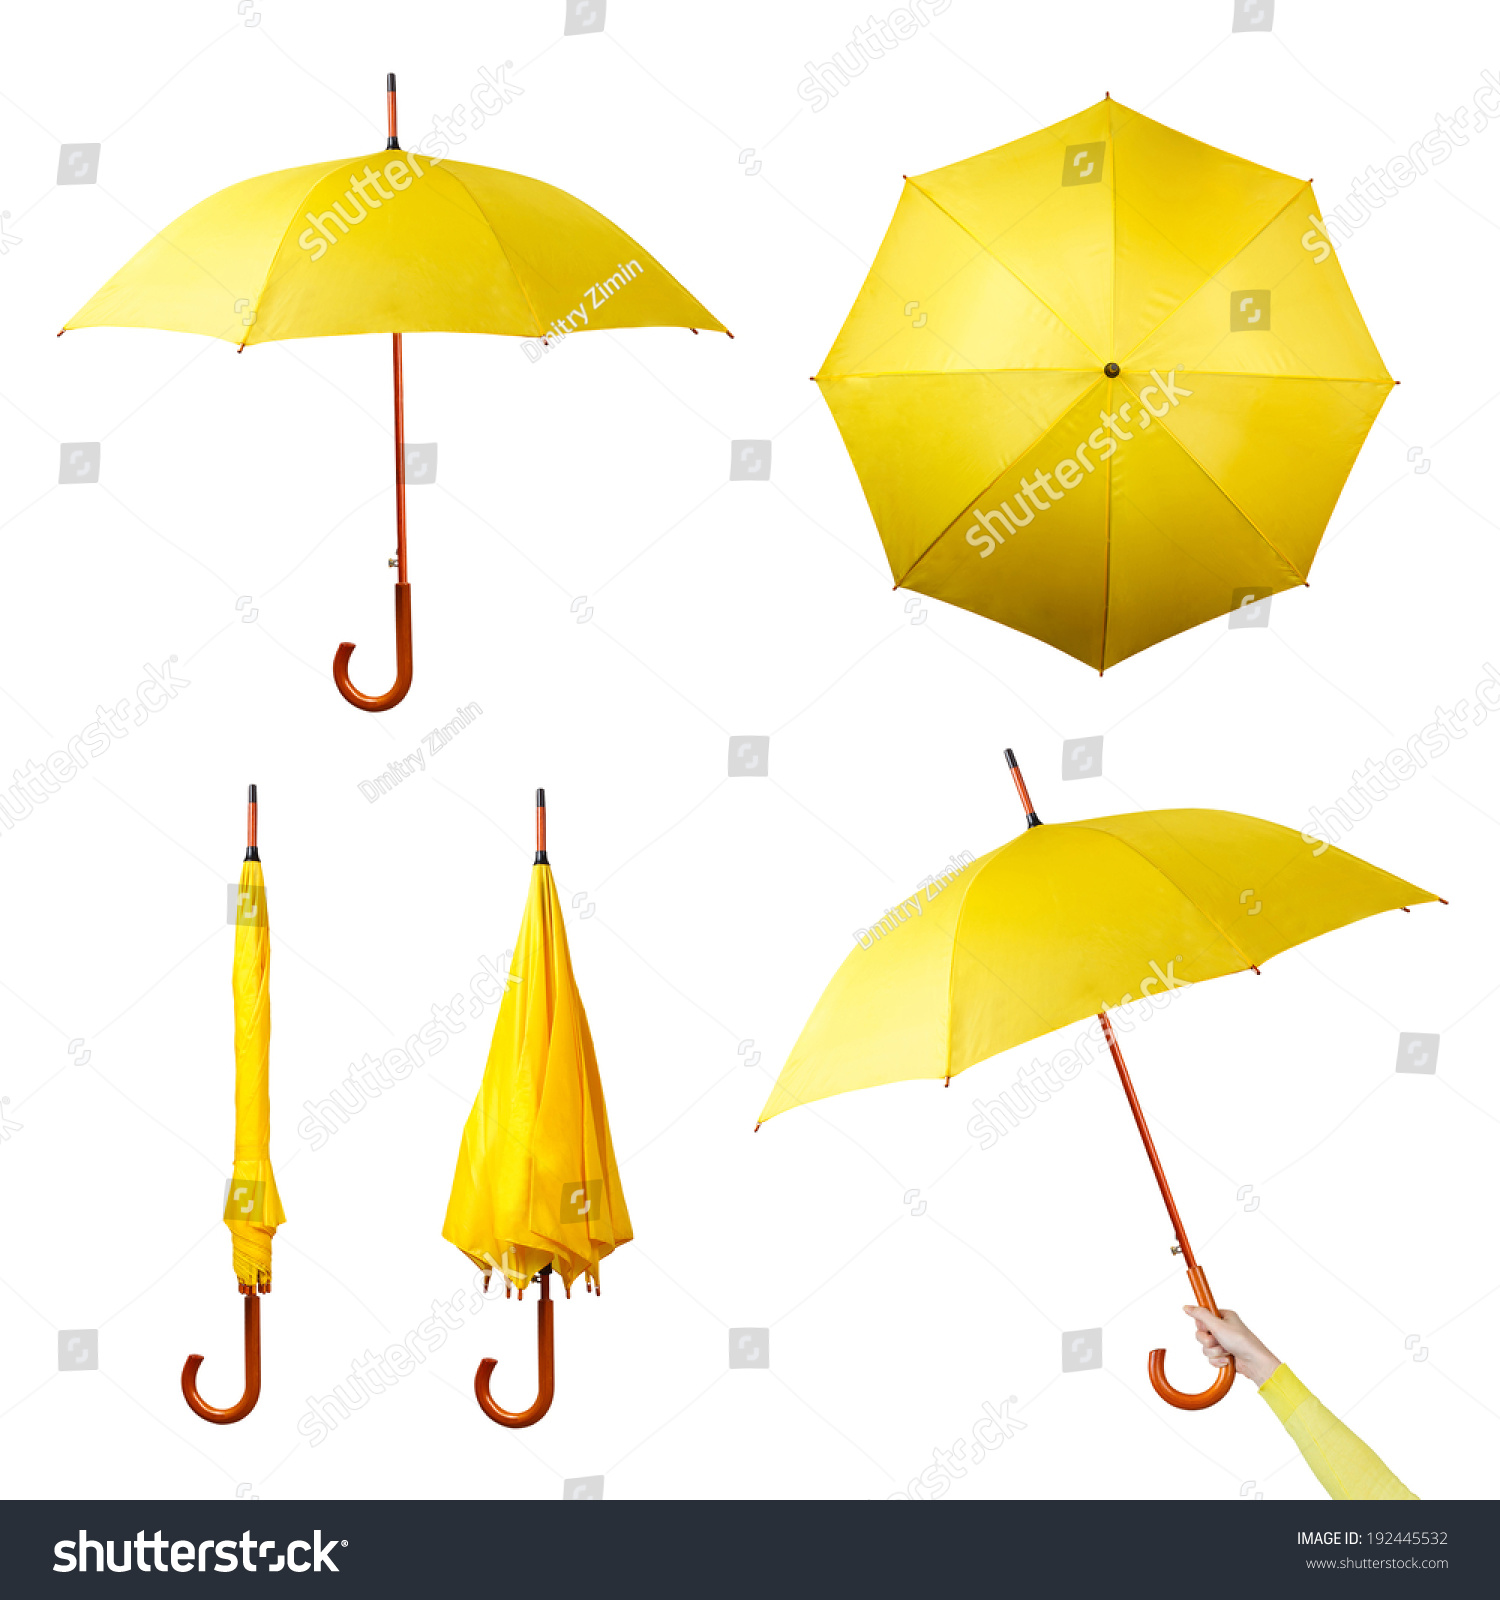 Set of various umbrellas isolated on a white background. Collection of folded, opened, top view umbrellas #192445532